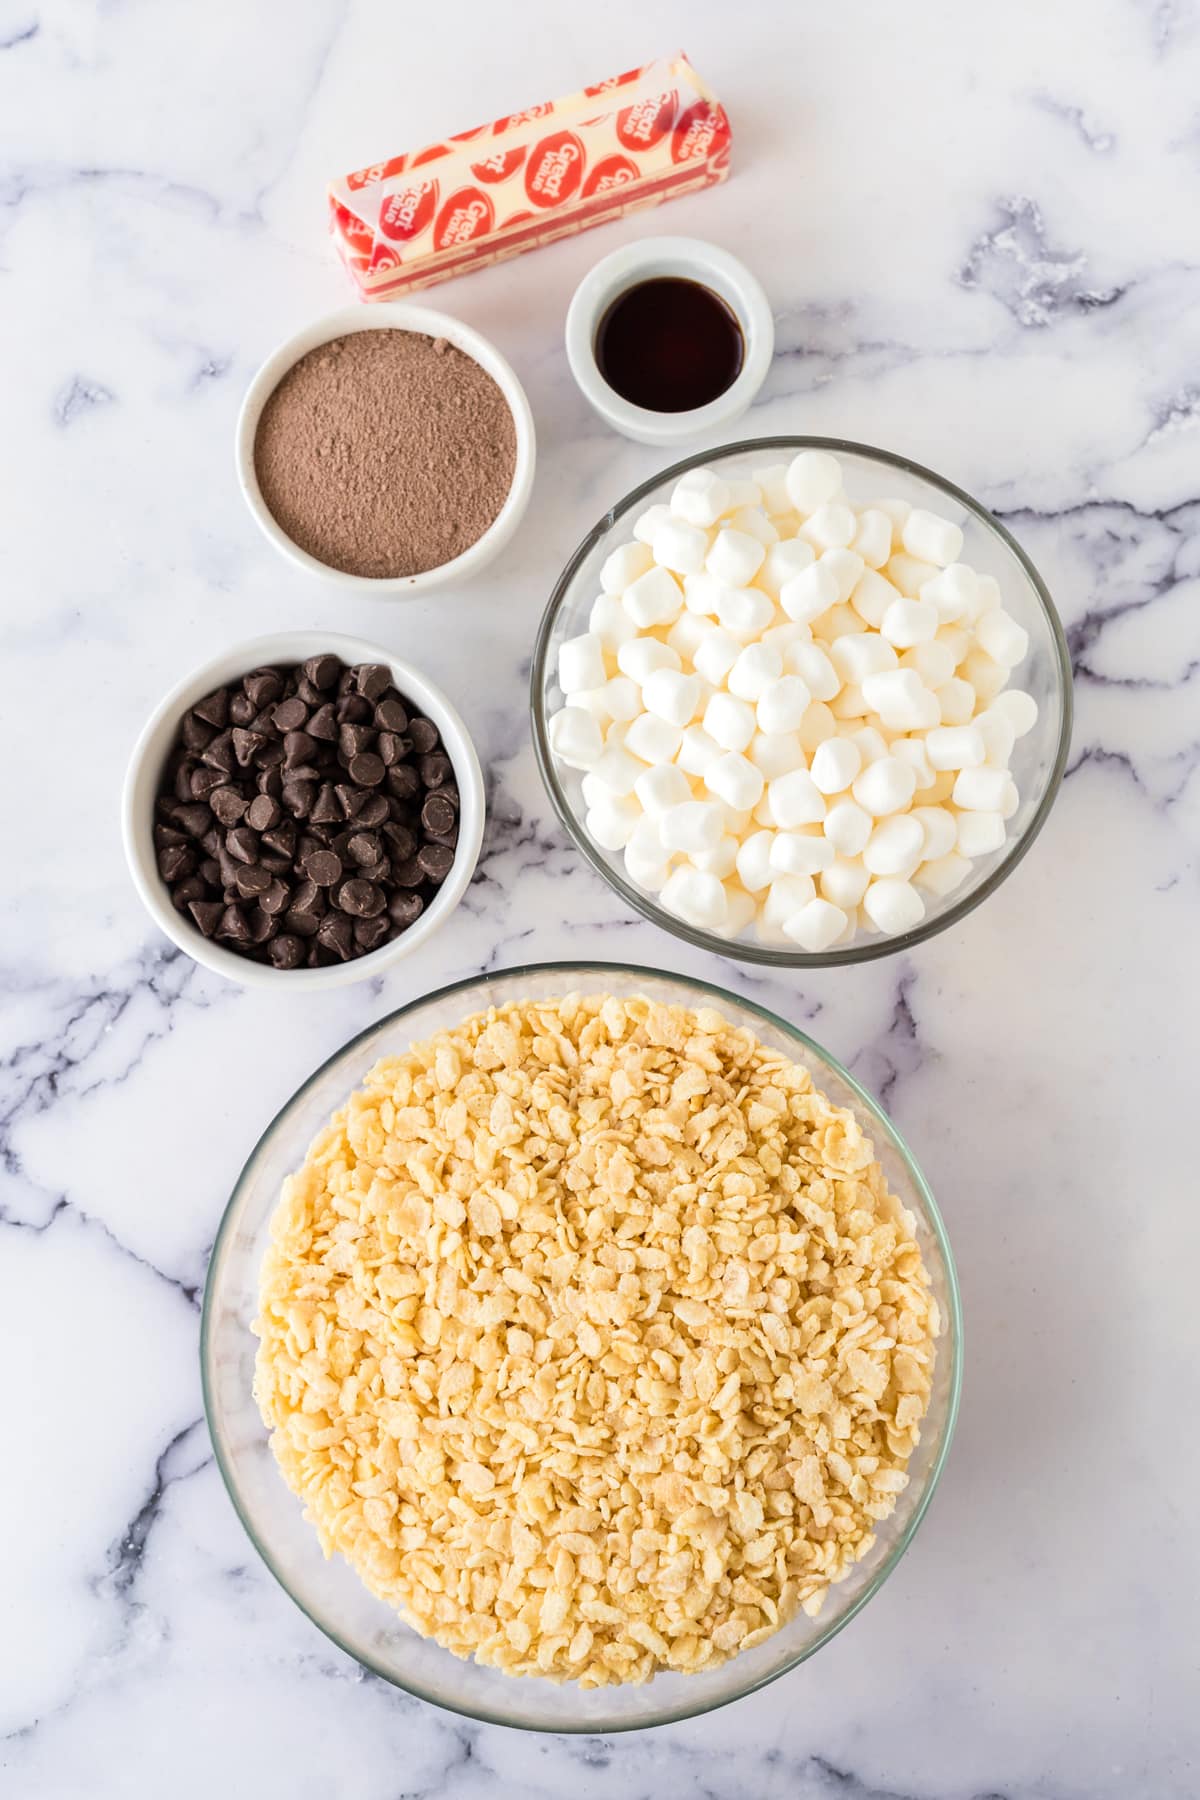 Ingredients for Hot Chocolate Rice Krispy Treats are the following: salted butter, vanilla extract, miniature marshmallows, divided, hot chocolate mix, rice Krispies cereal and semi-sweet chocolate chips